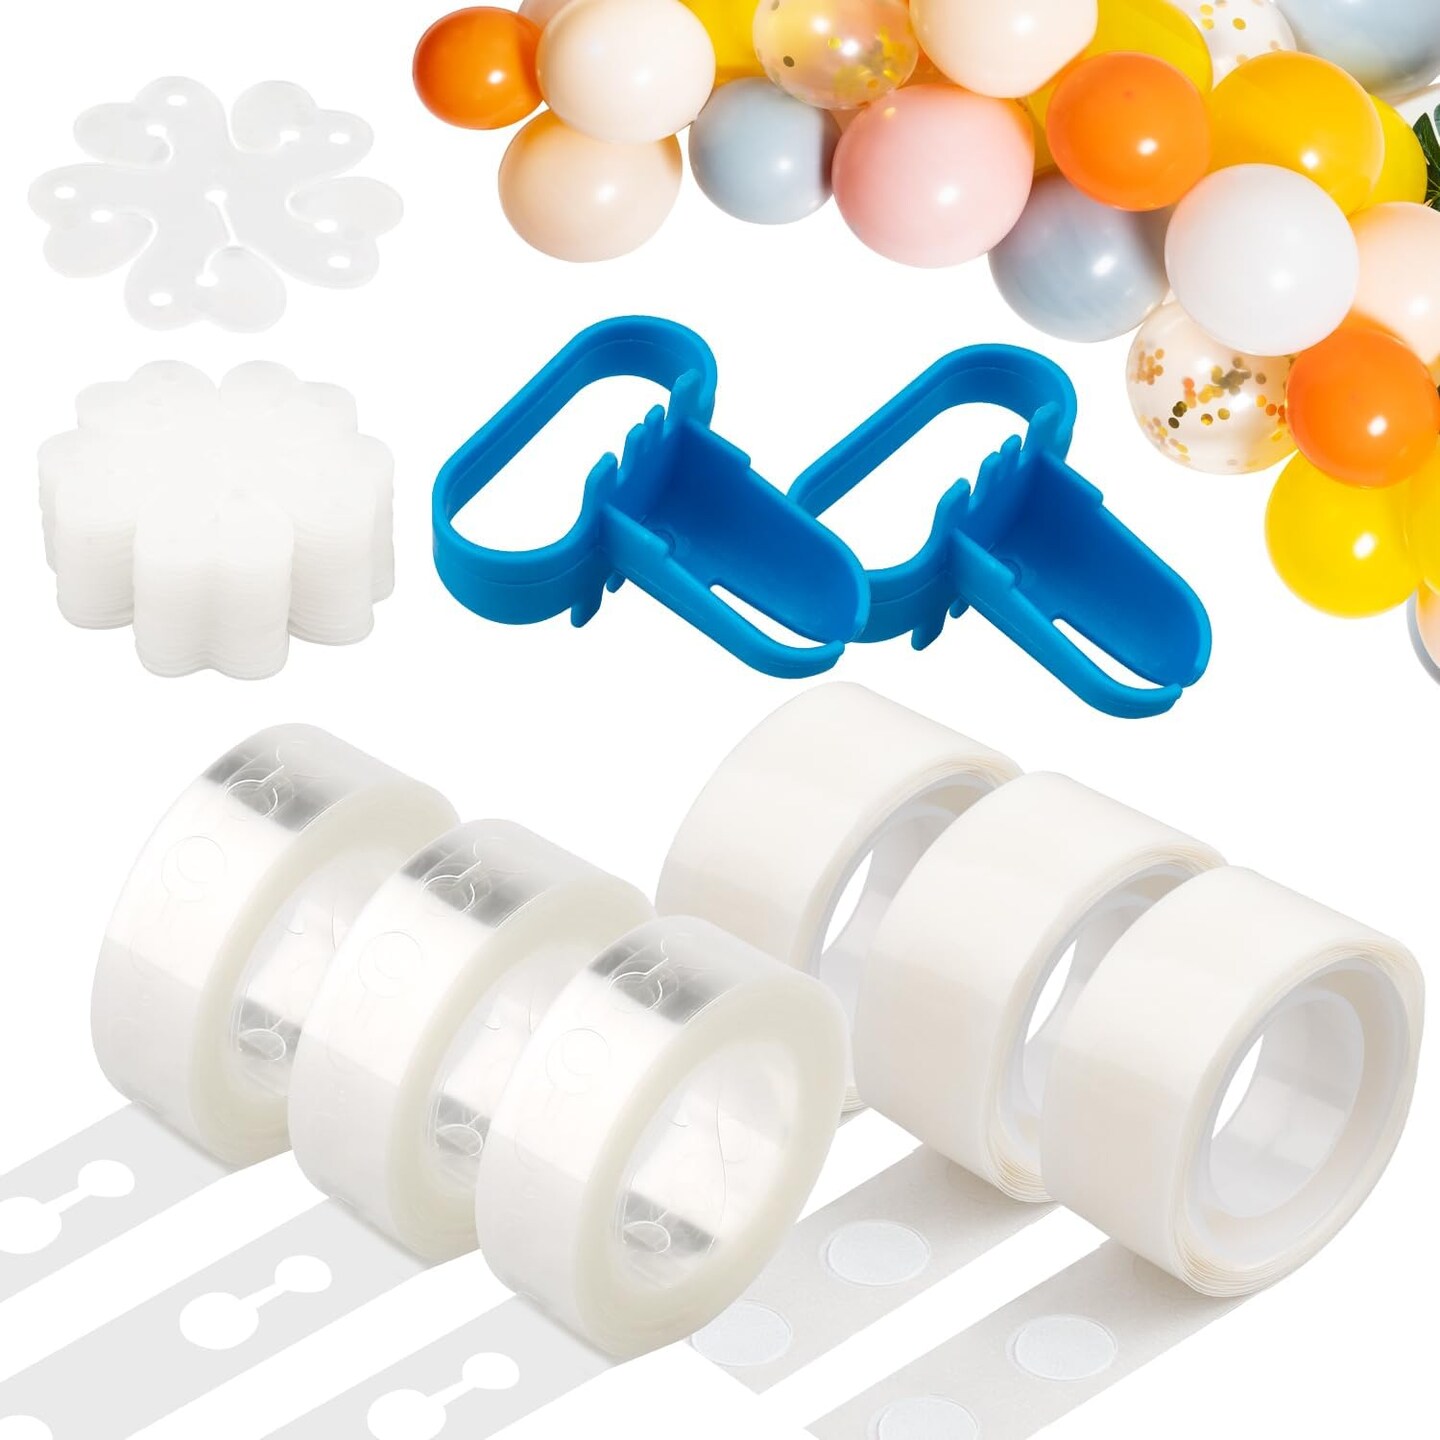 Balloon Arch Kit Balloon Garland Decorating Strip Kit, Balloon Tape Strips Double Hole with Dot Glue Point Stickers, Balloon Flower Clip, Balloon Tying Tool, Suitable for Party Birthday Wedding